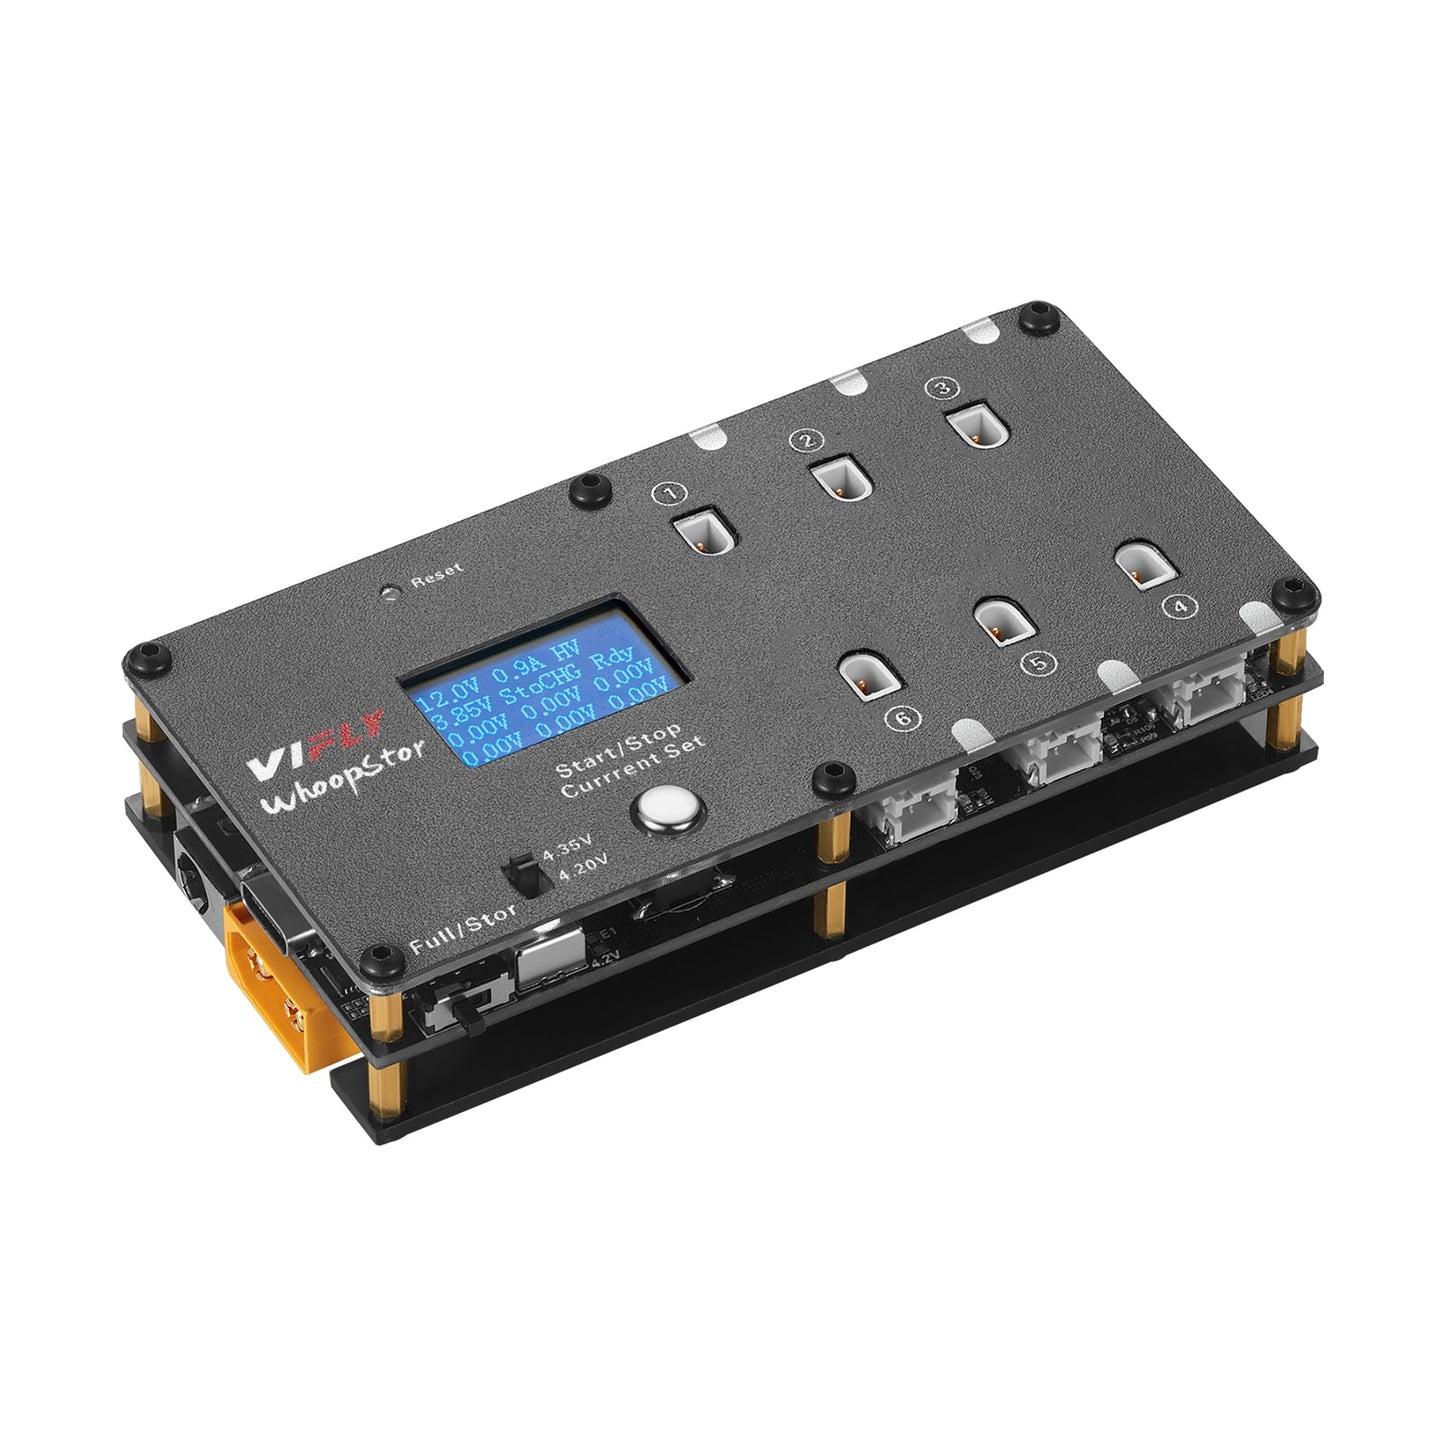 VIFLY WhoopStor V2(New Version) 6 Ports 1S Battery Storage Charger Discharger for FPV Tinywhoop 4.2V 4.35V BT2.0 PH2.0 Battery.